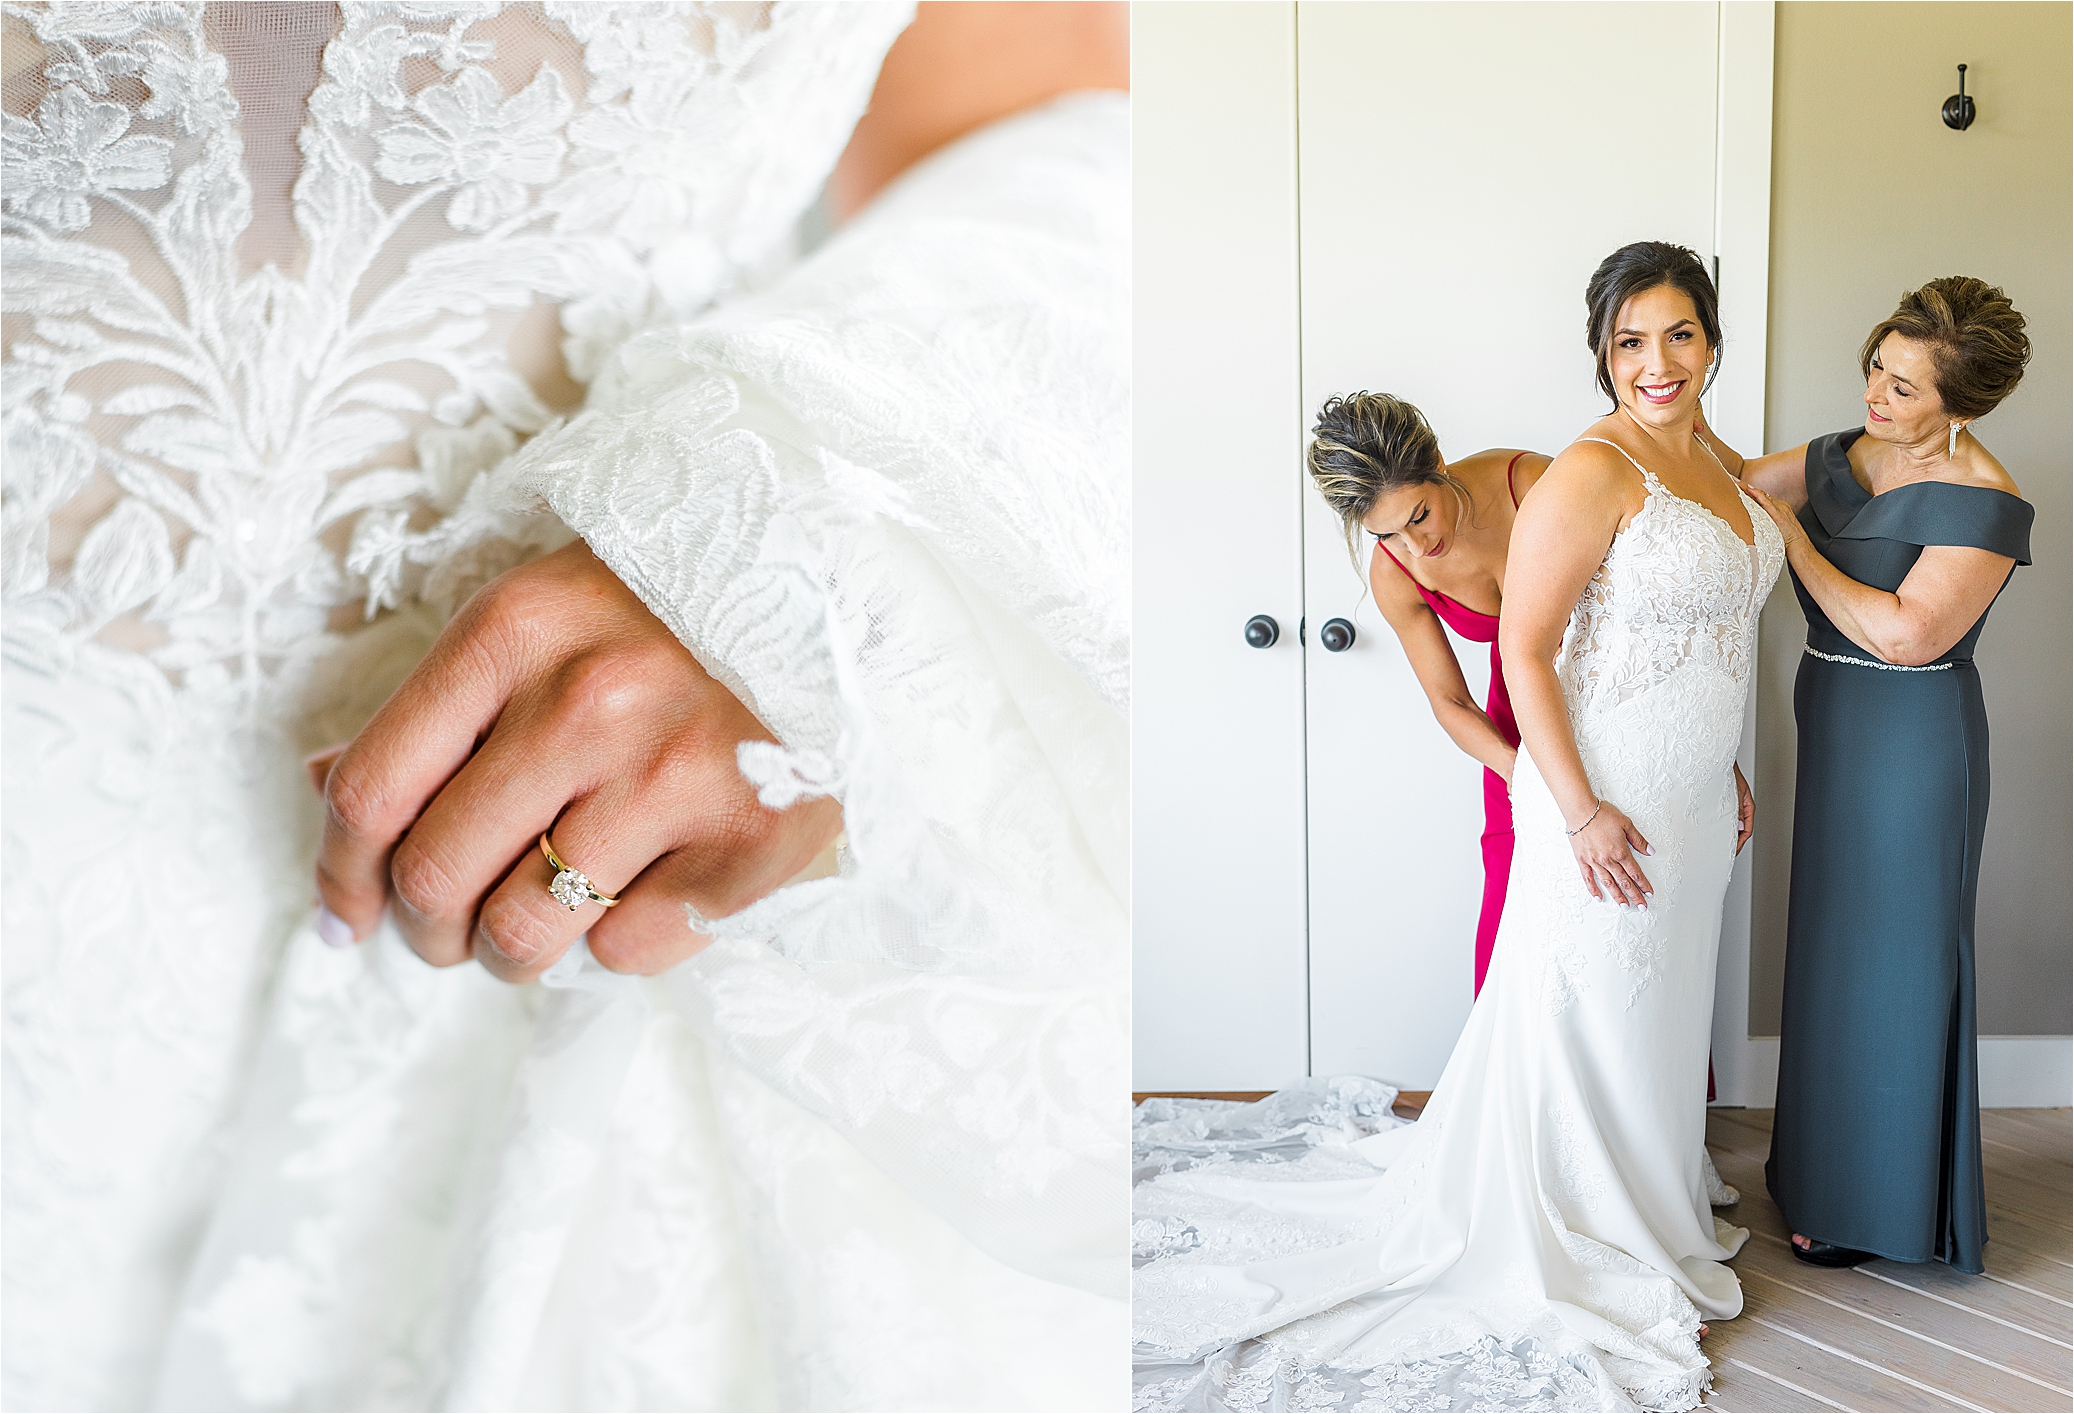 A bride getting ready and being zipped up on her wedding day at Paniolo Ranch in Boerne, Texas